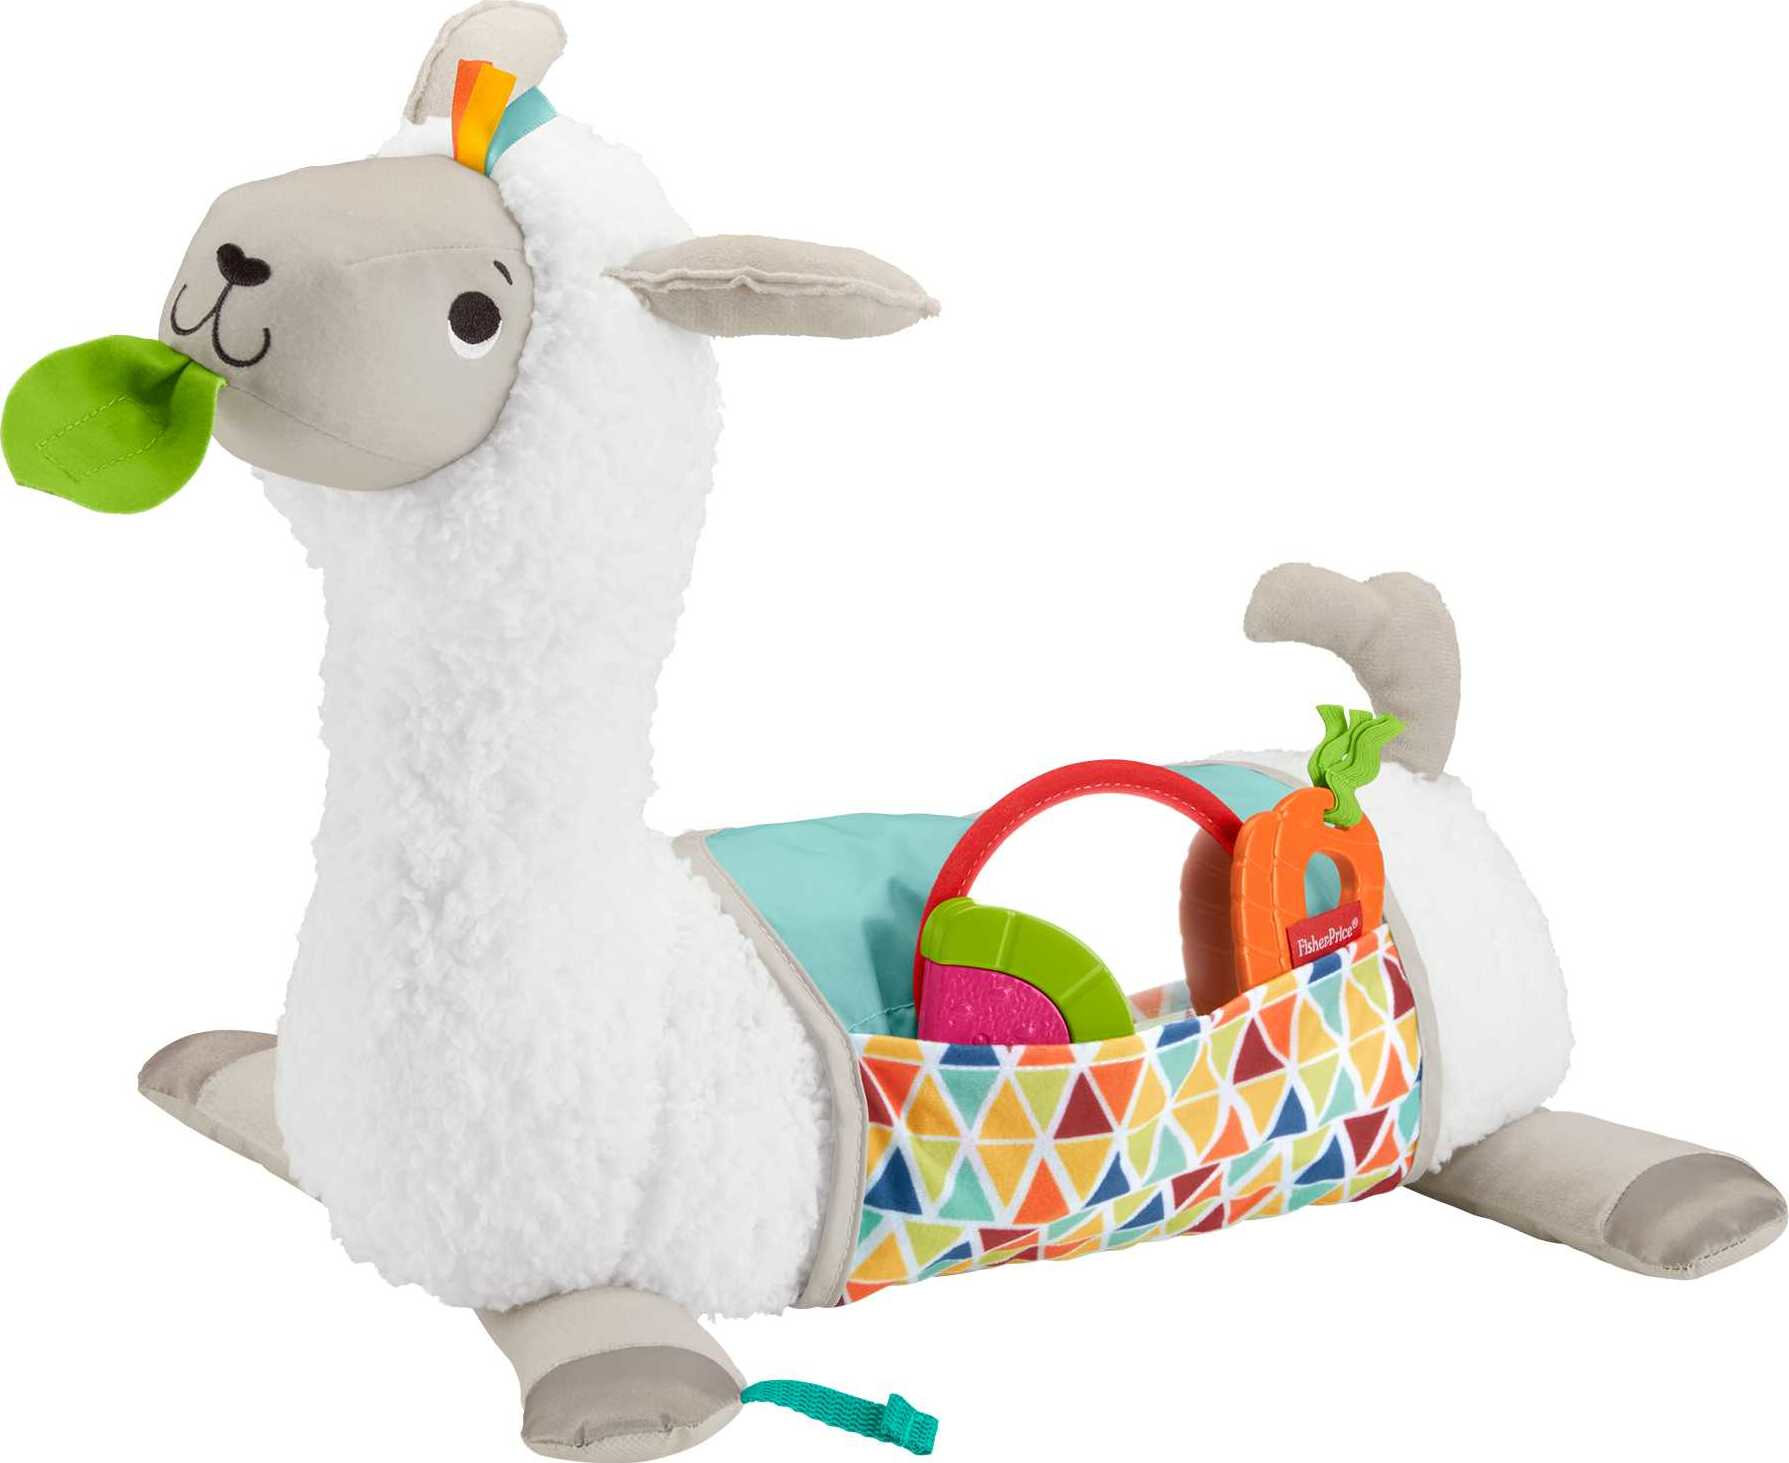 Fisher-Price Grow-with-Me-Tummy Time Llama Plush Baby Wedge with 3 Take-Along Sensory Toys, Unisex - image 1 of 7